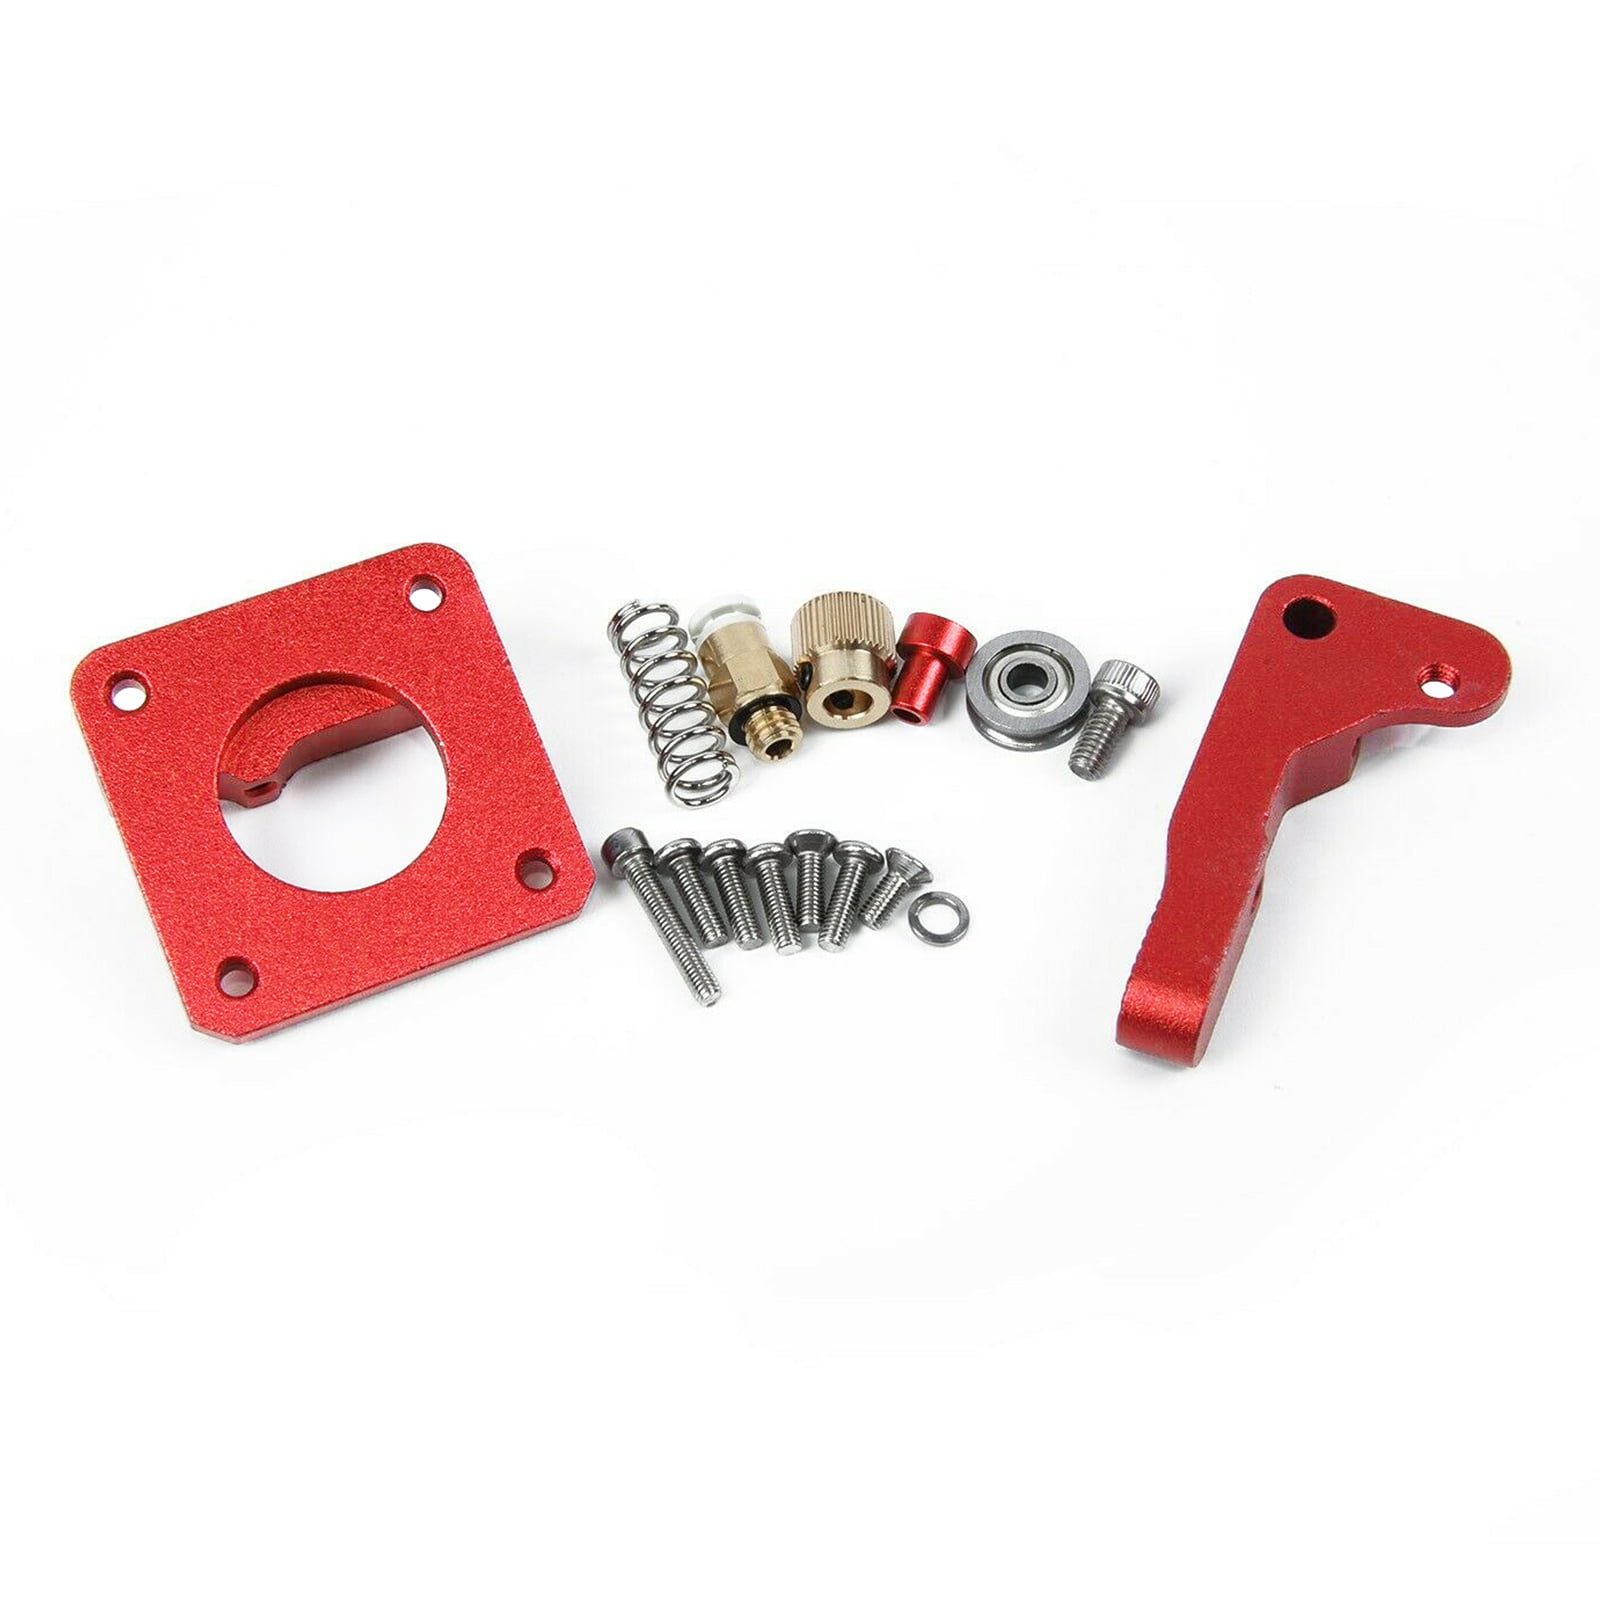 1 Replaces Accessories Spare Parts for High Premium Easy to Install Extruder Mechanism 